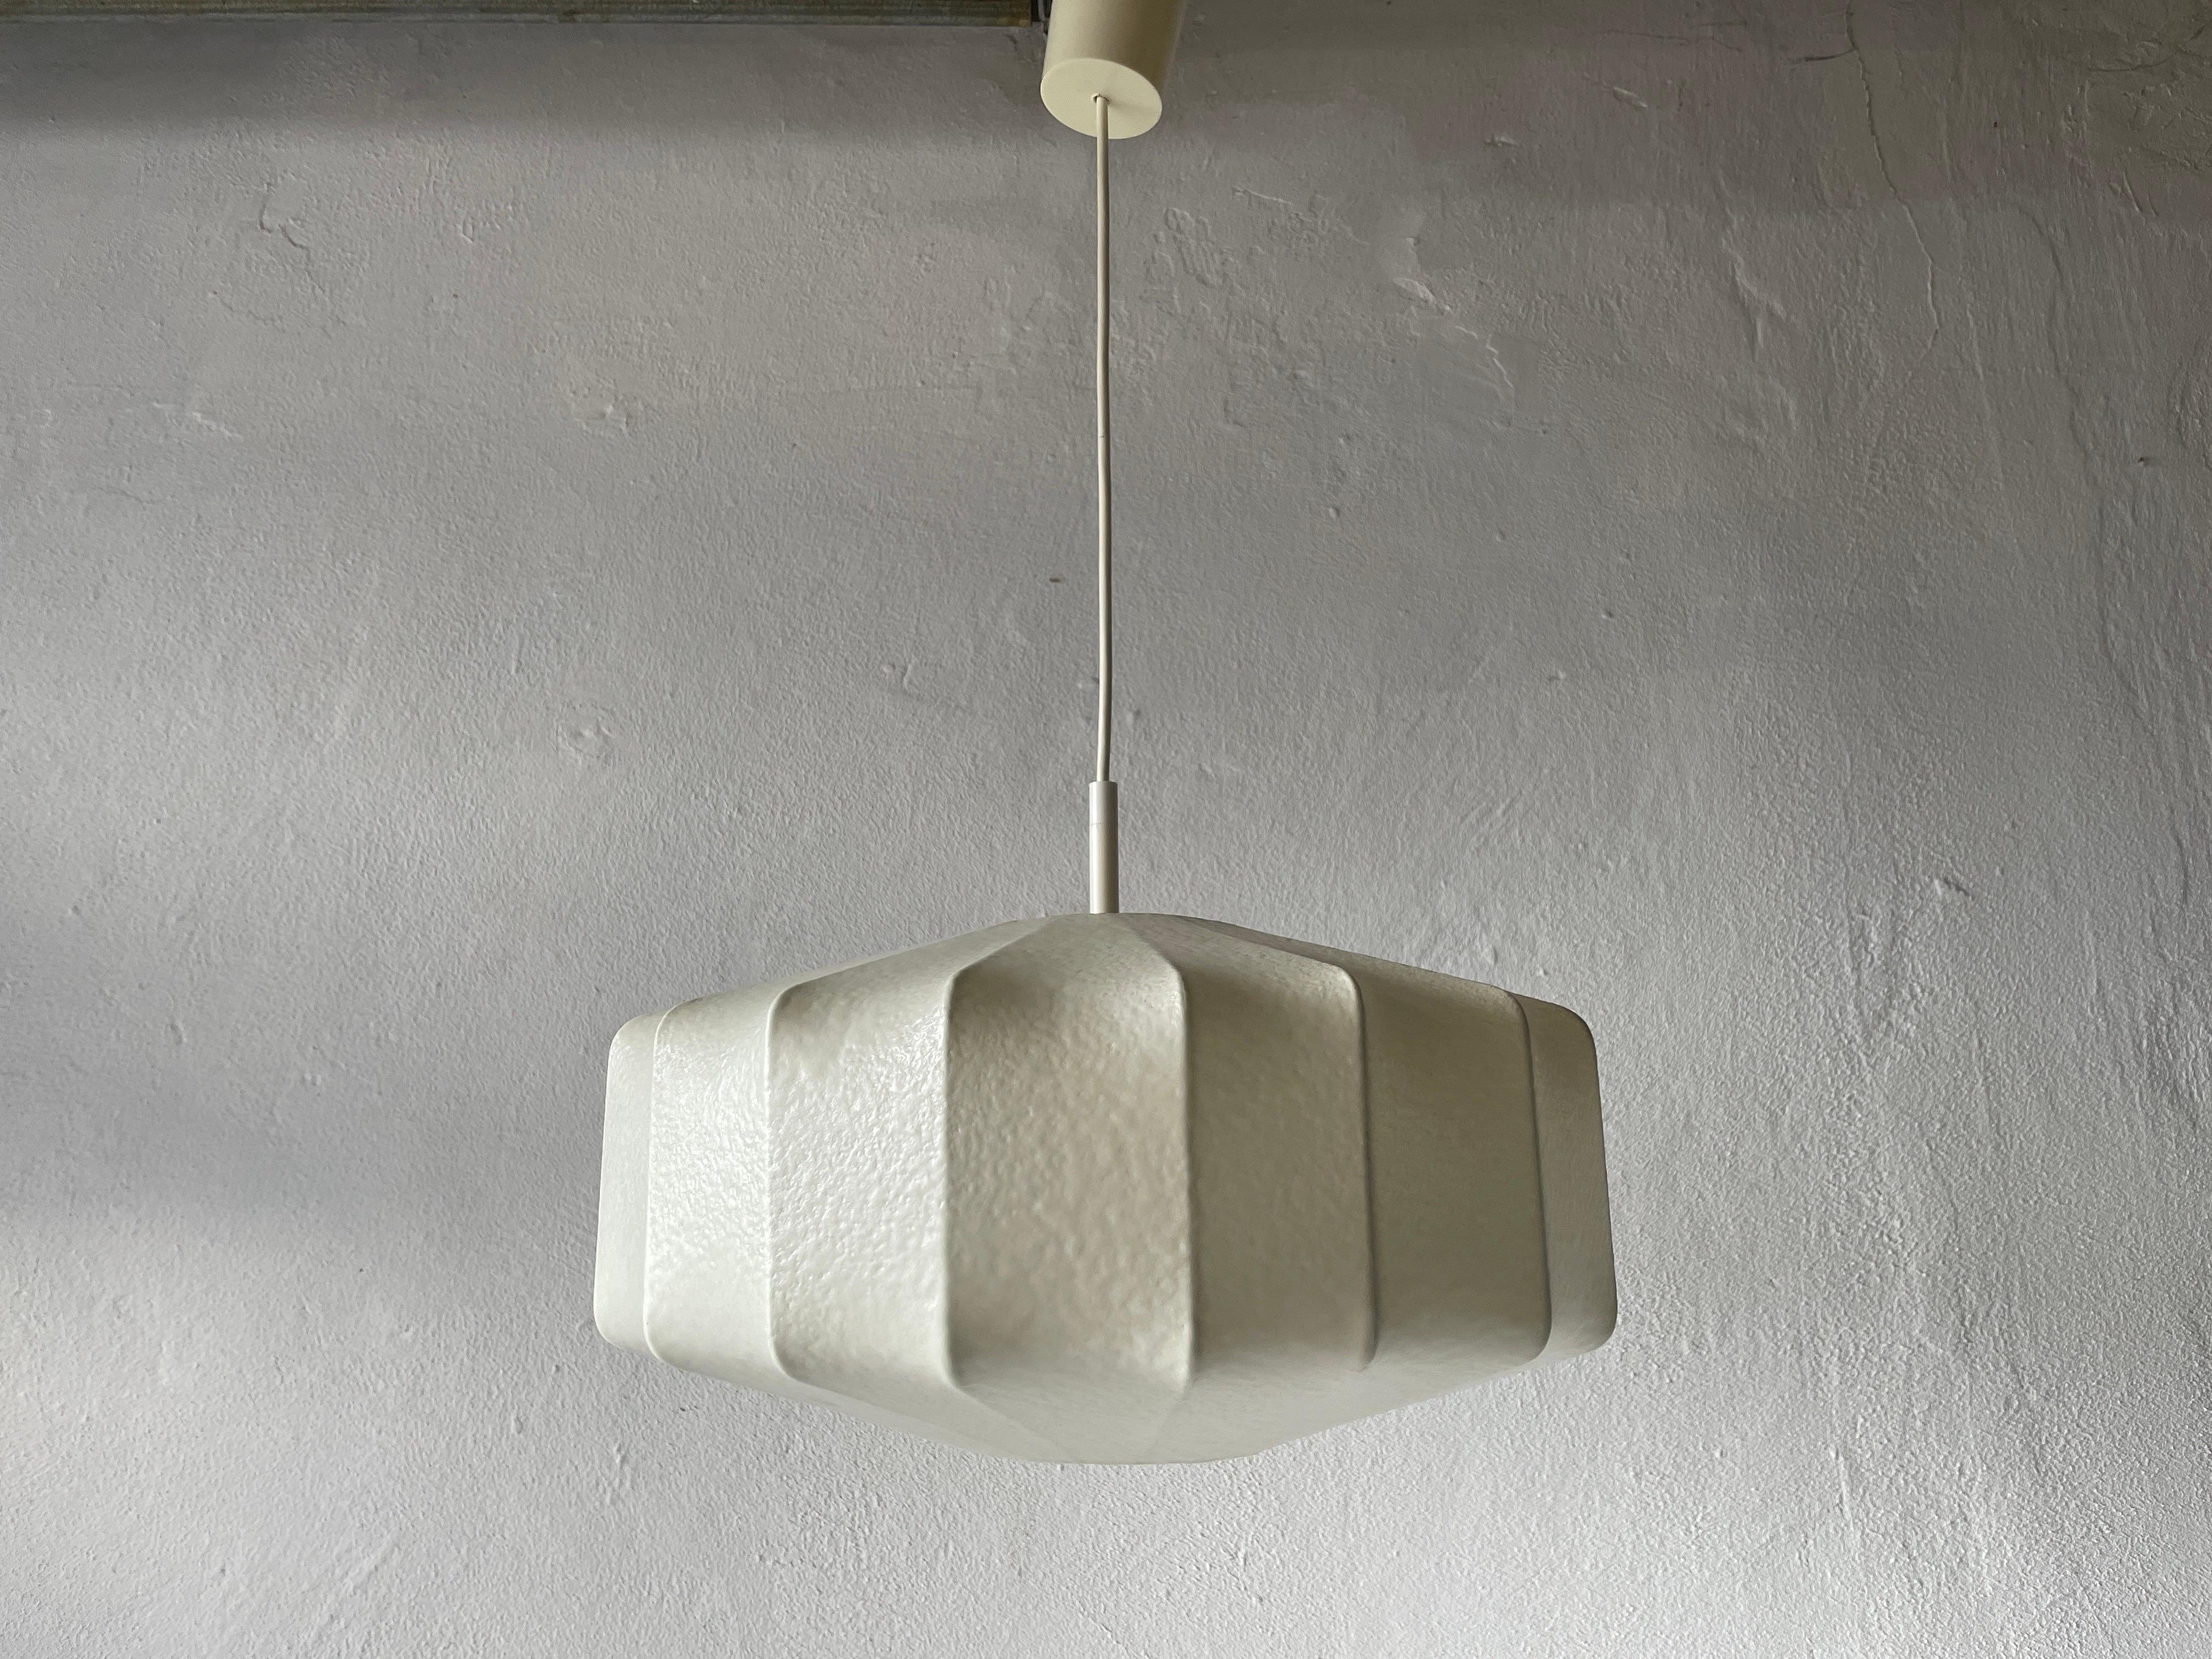 Resin Cocoon Pendant Lamp by Goldkant, 1960s, Germany For Sale